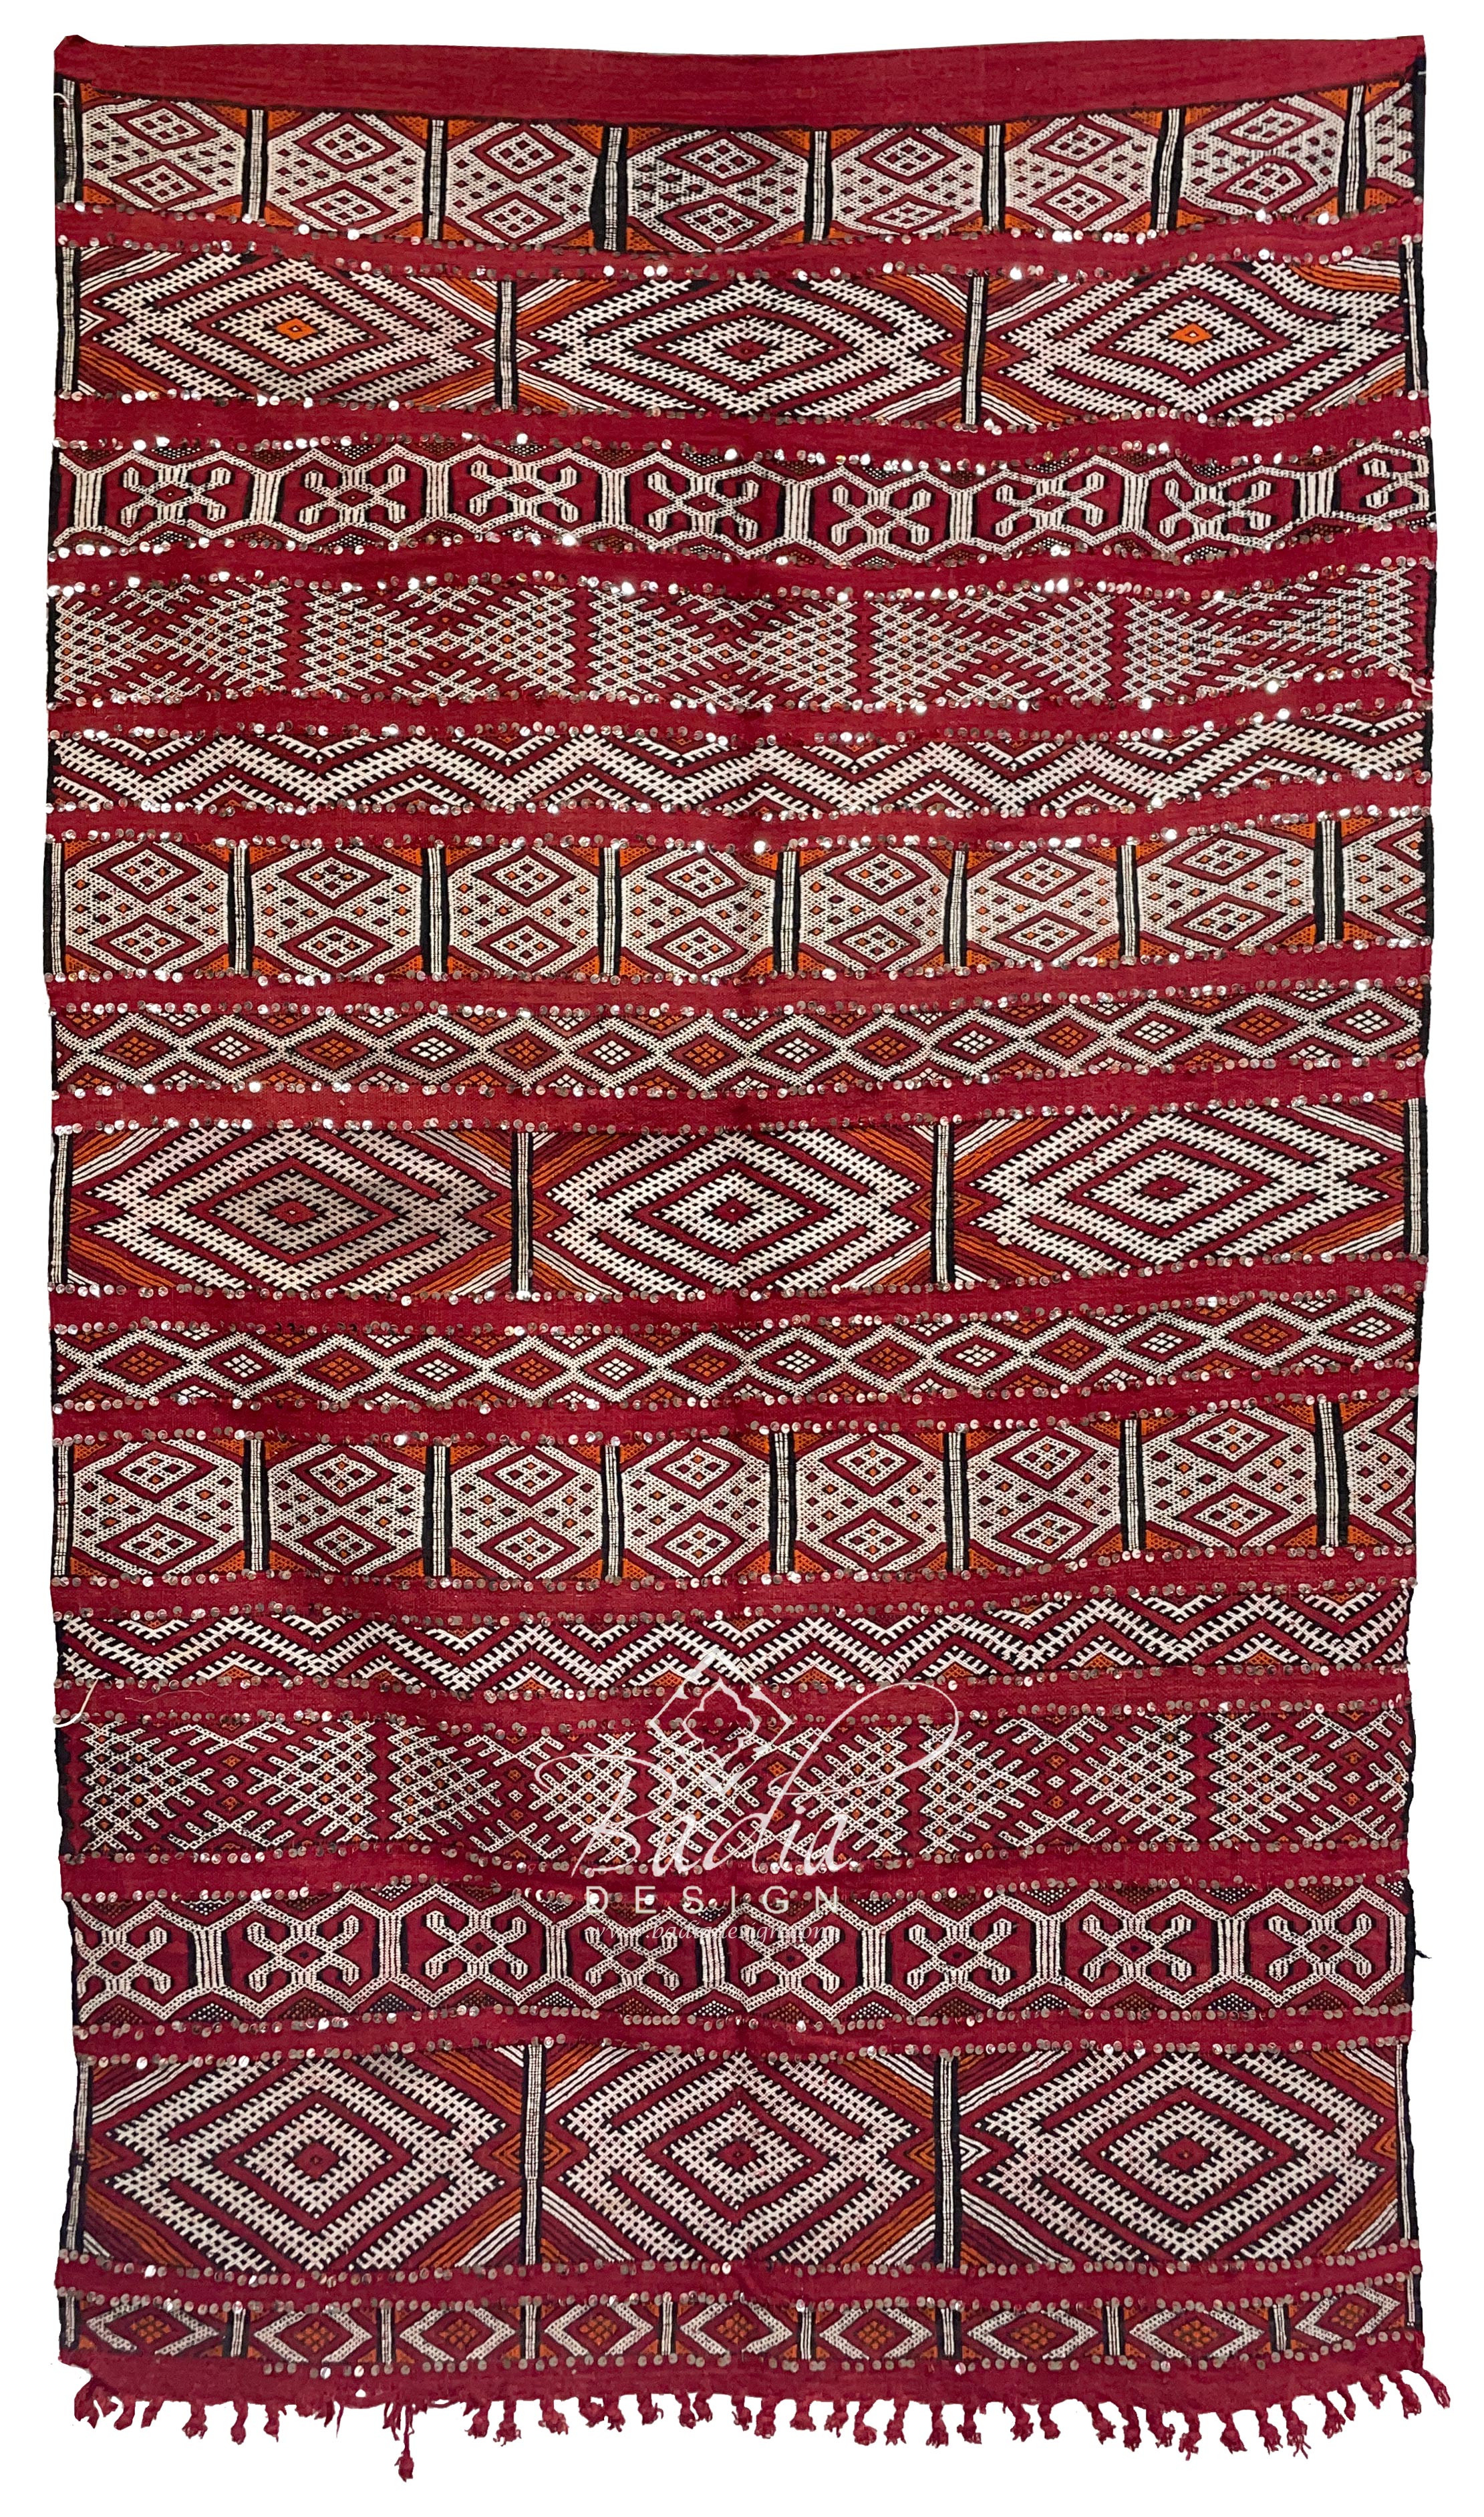 red-moroccan-kilim-rug-with-silver-sequin-r0241.jpg